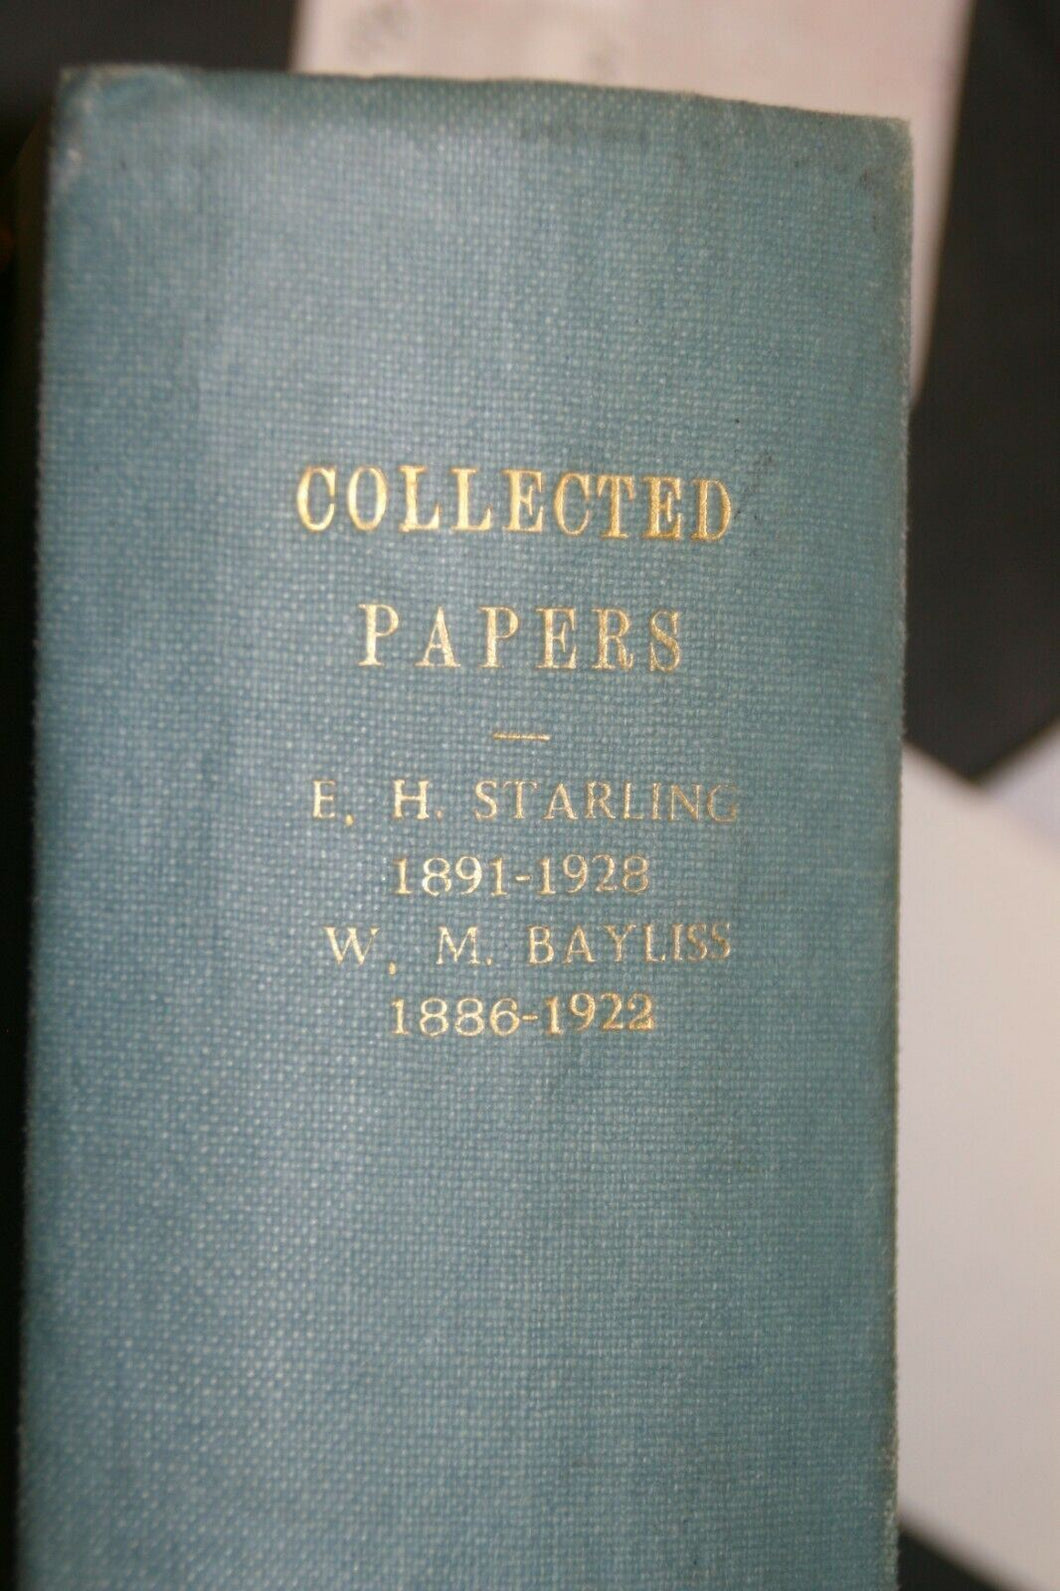 Collected Papers E.H. Starling 1891-1928 W.M. Bayliss 1886-1922